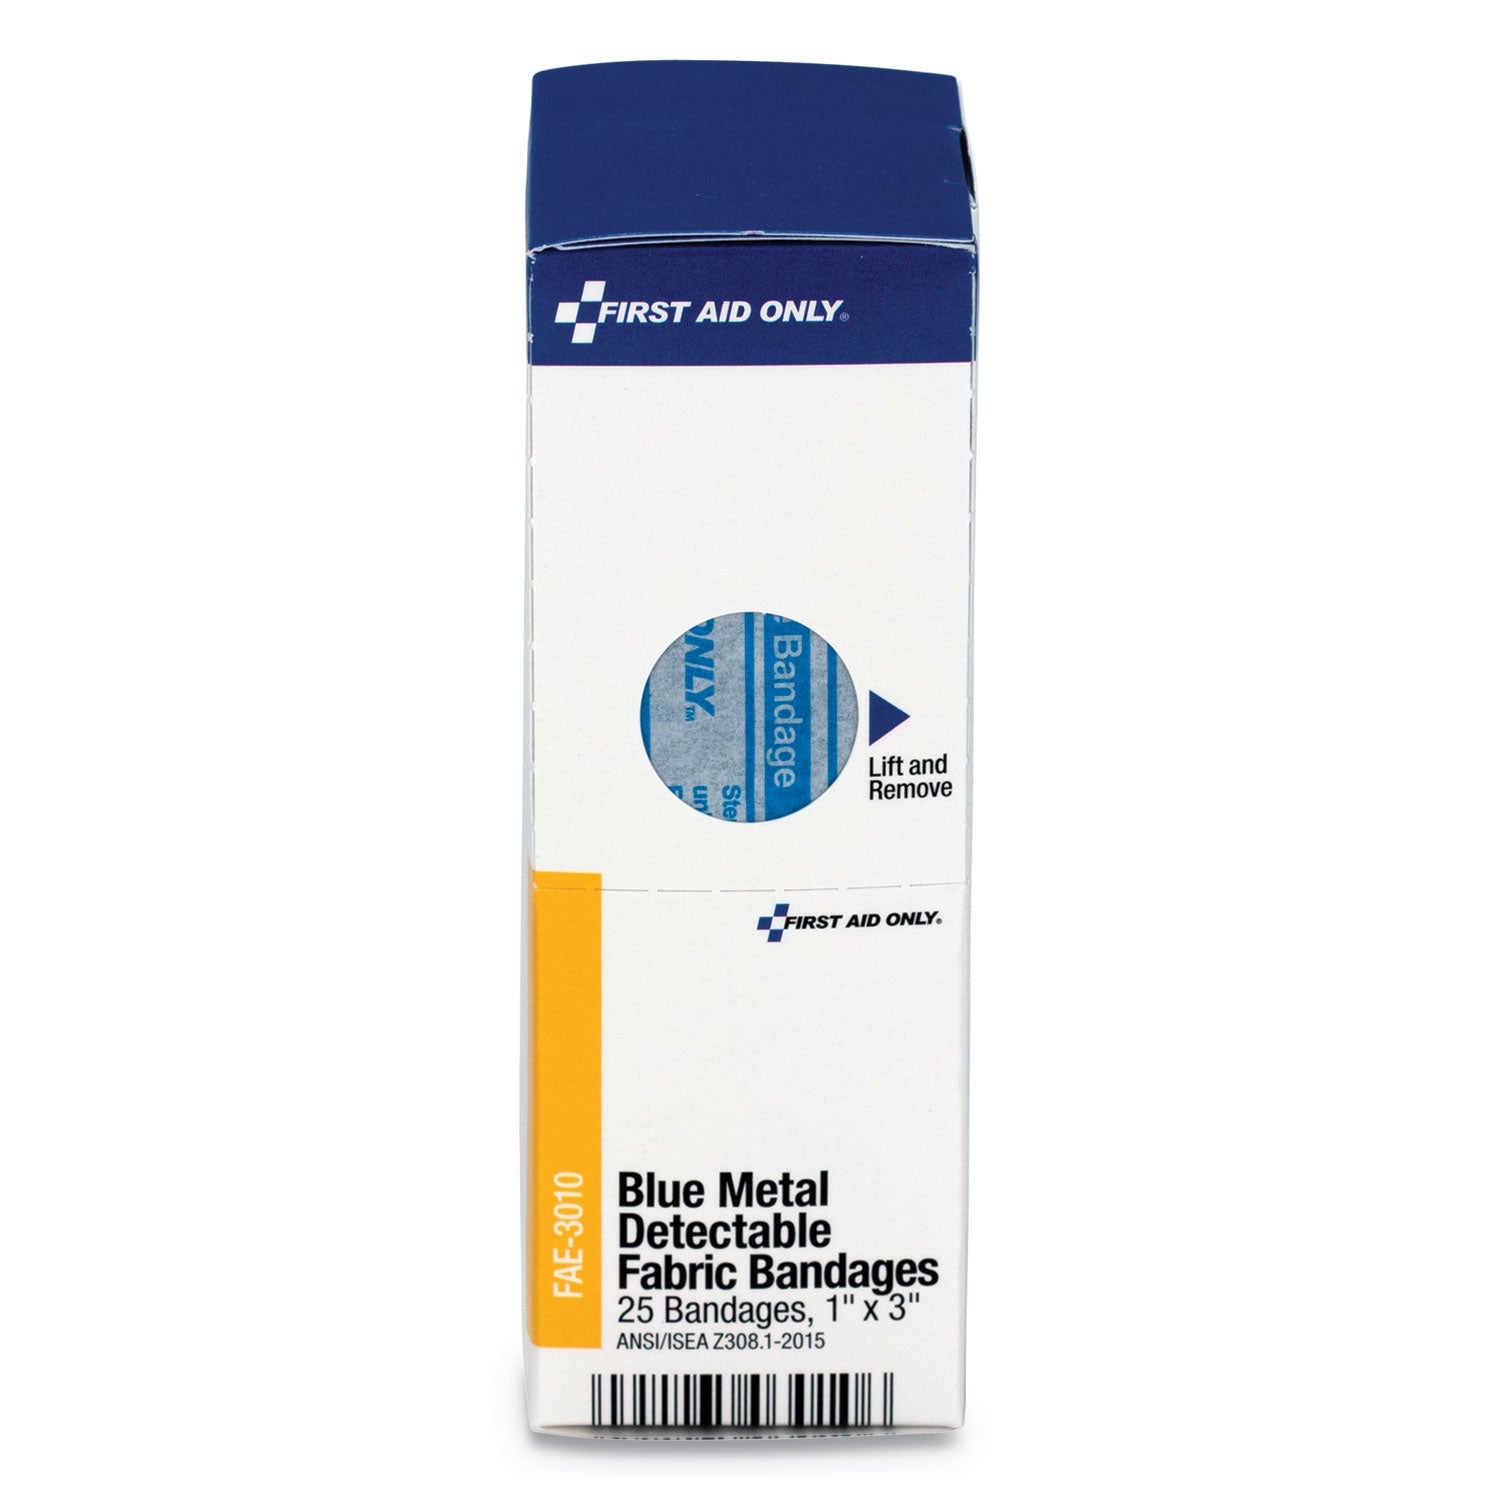 refill-for-smartcompliance-general-cabinet-blue-metal-detectable-bandages1-x-3-25-box_faofae3010 - 2